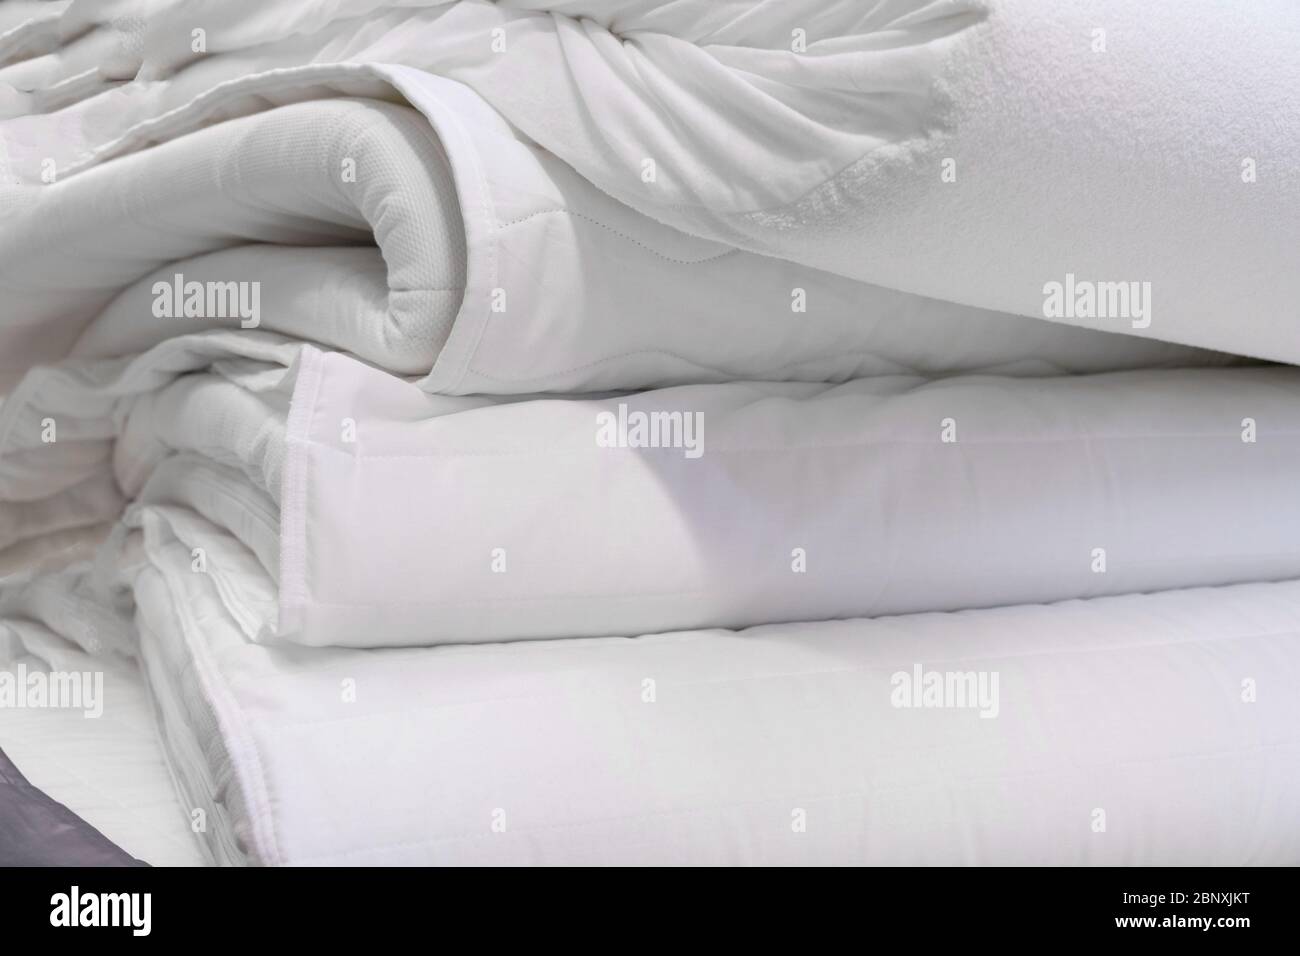 Stack of white mattresses in room. Close up Stock Photo